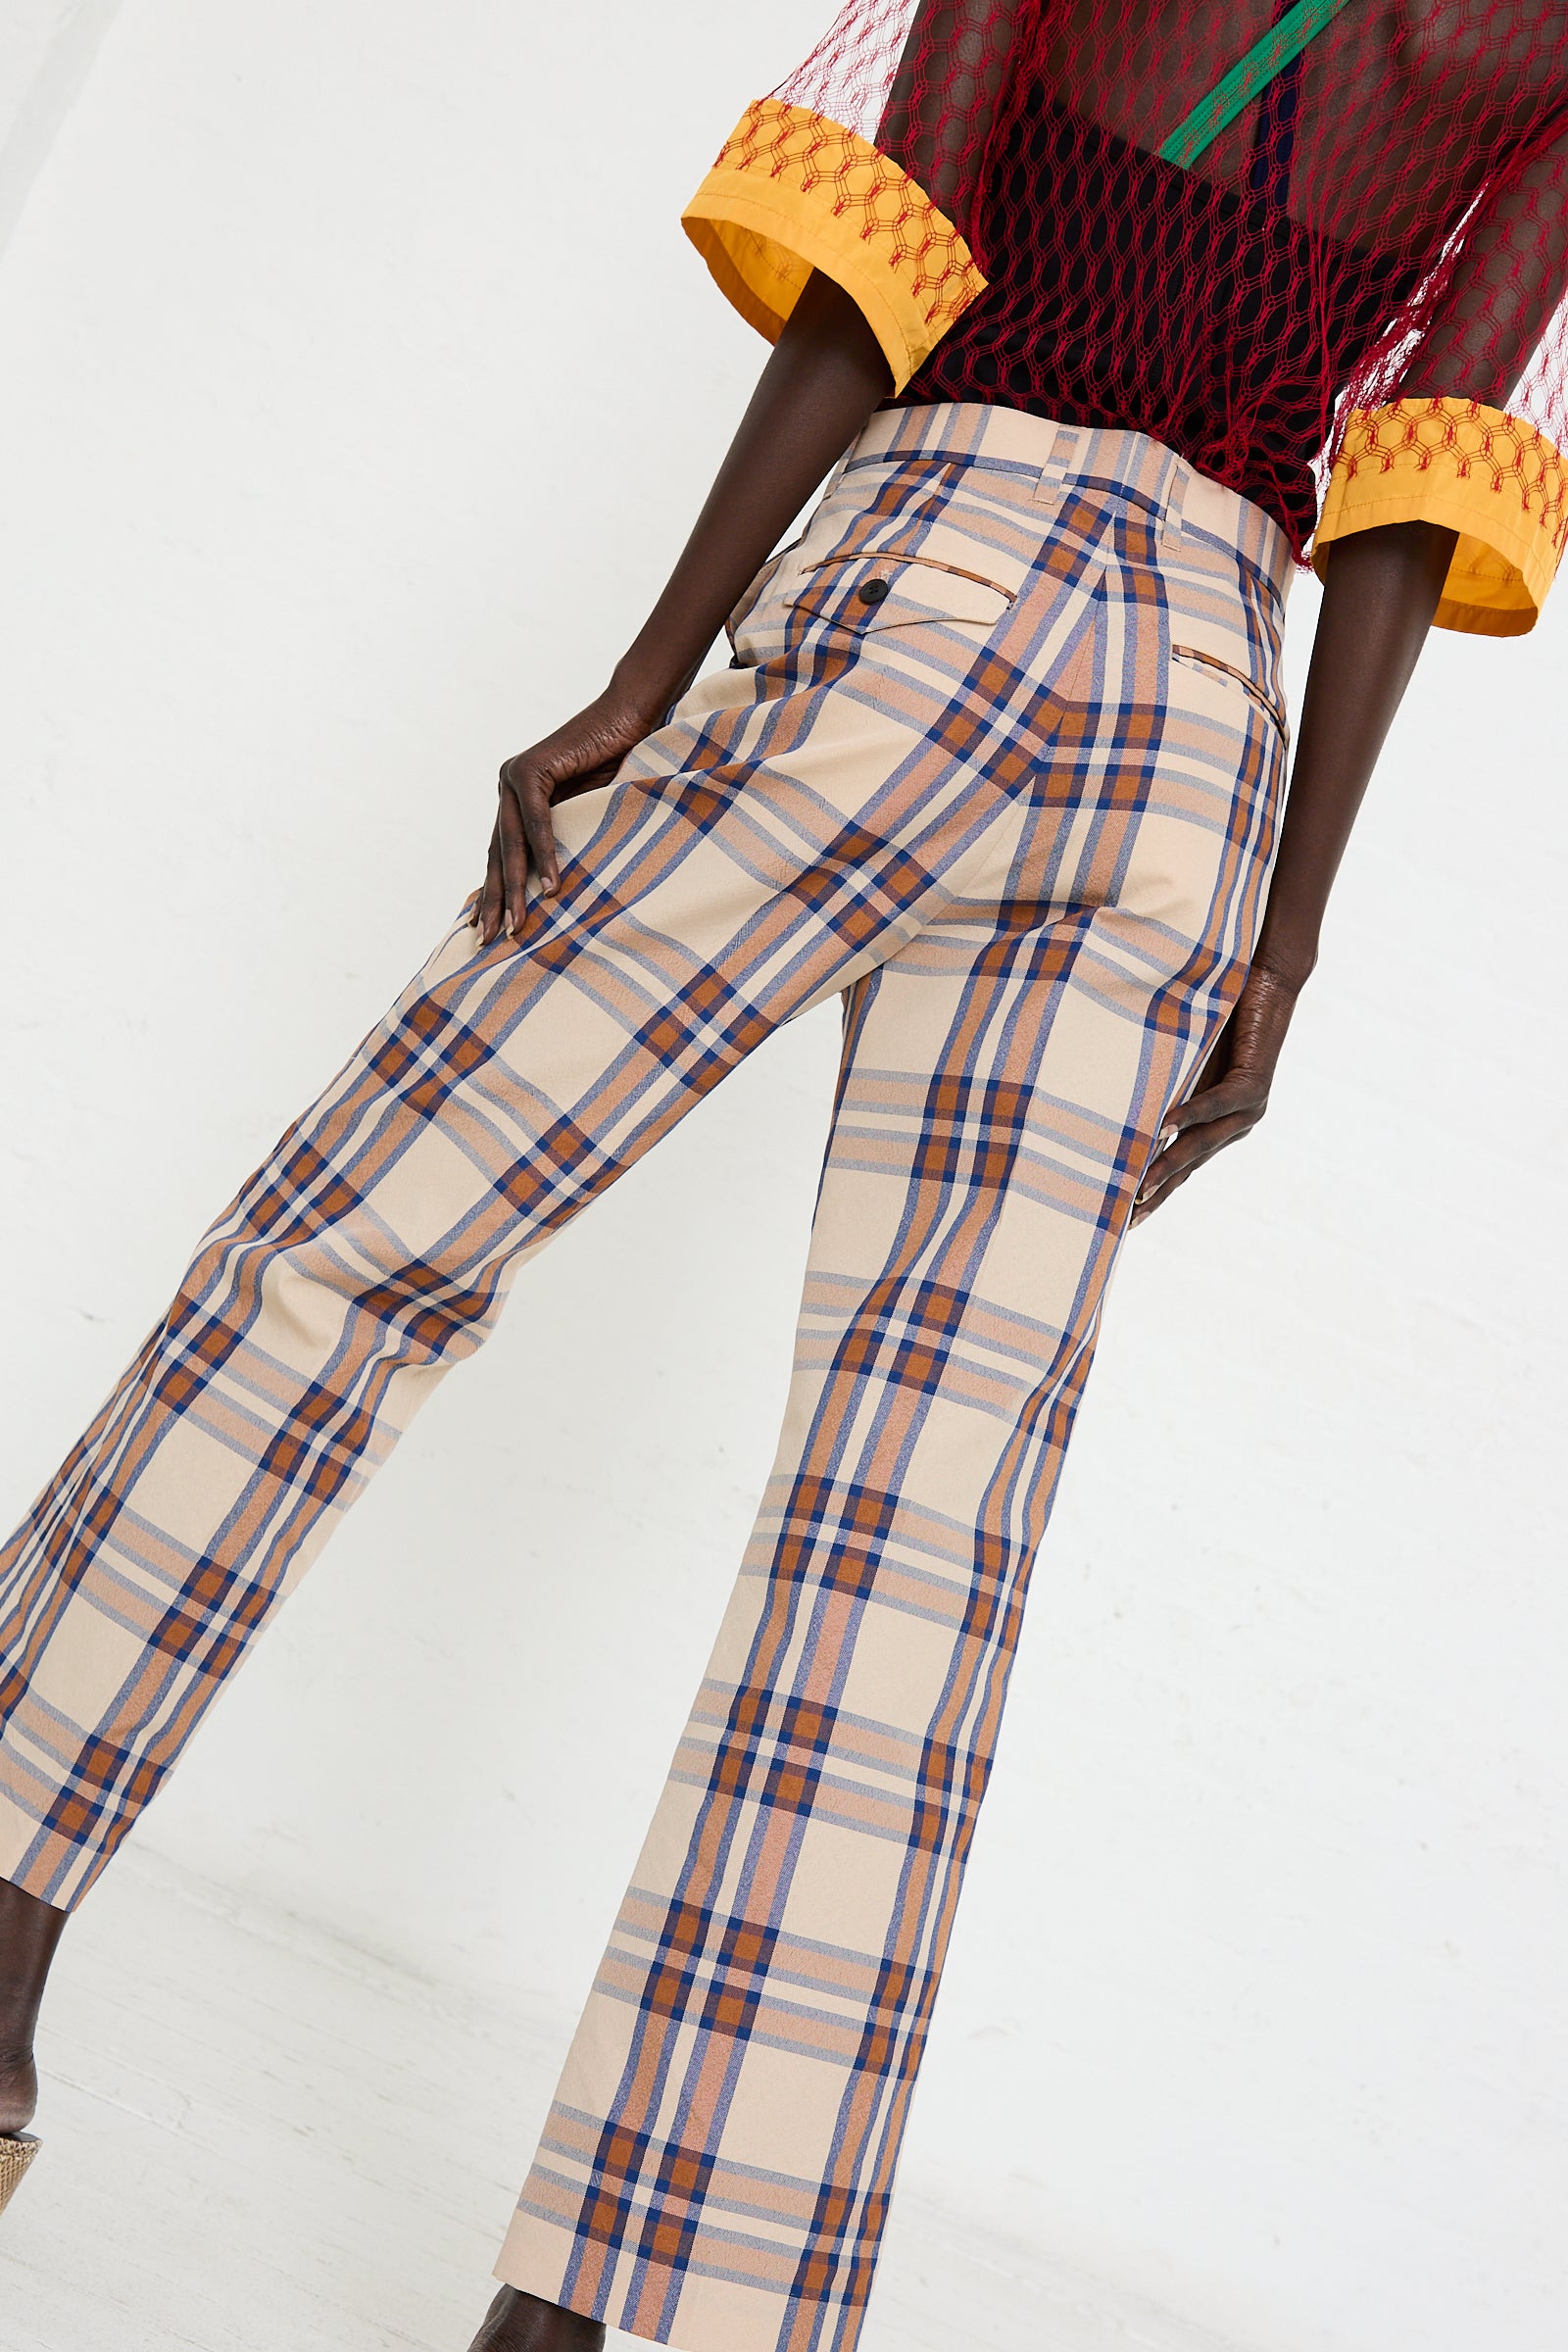 A person stands sideways wearing TOGA ARCHIVES Wool Check Pant in Beige with slightly flared legs and hands on hips, showcasing the rear and side view of the pants. The person also wears a colorful, textured top.